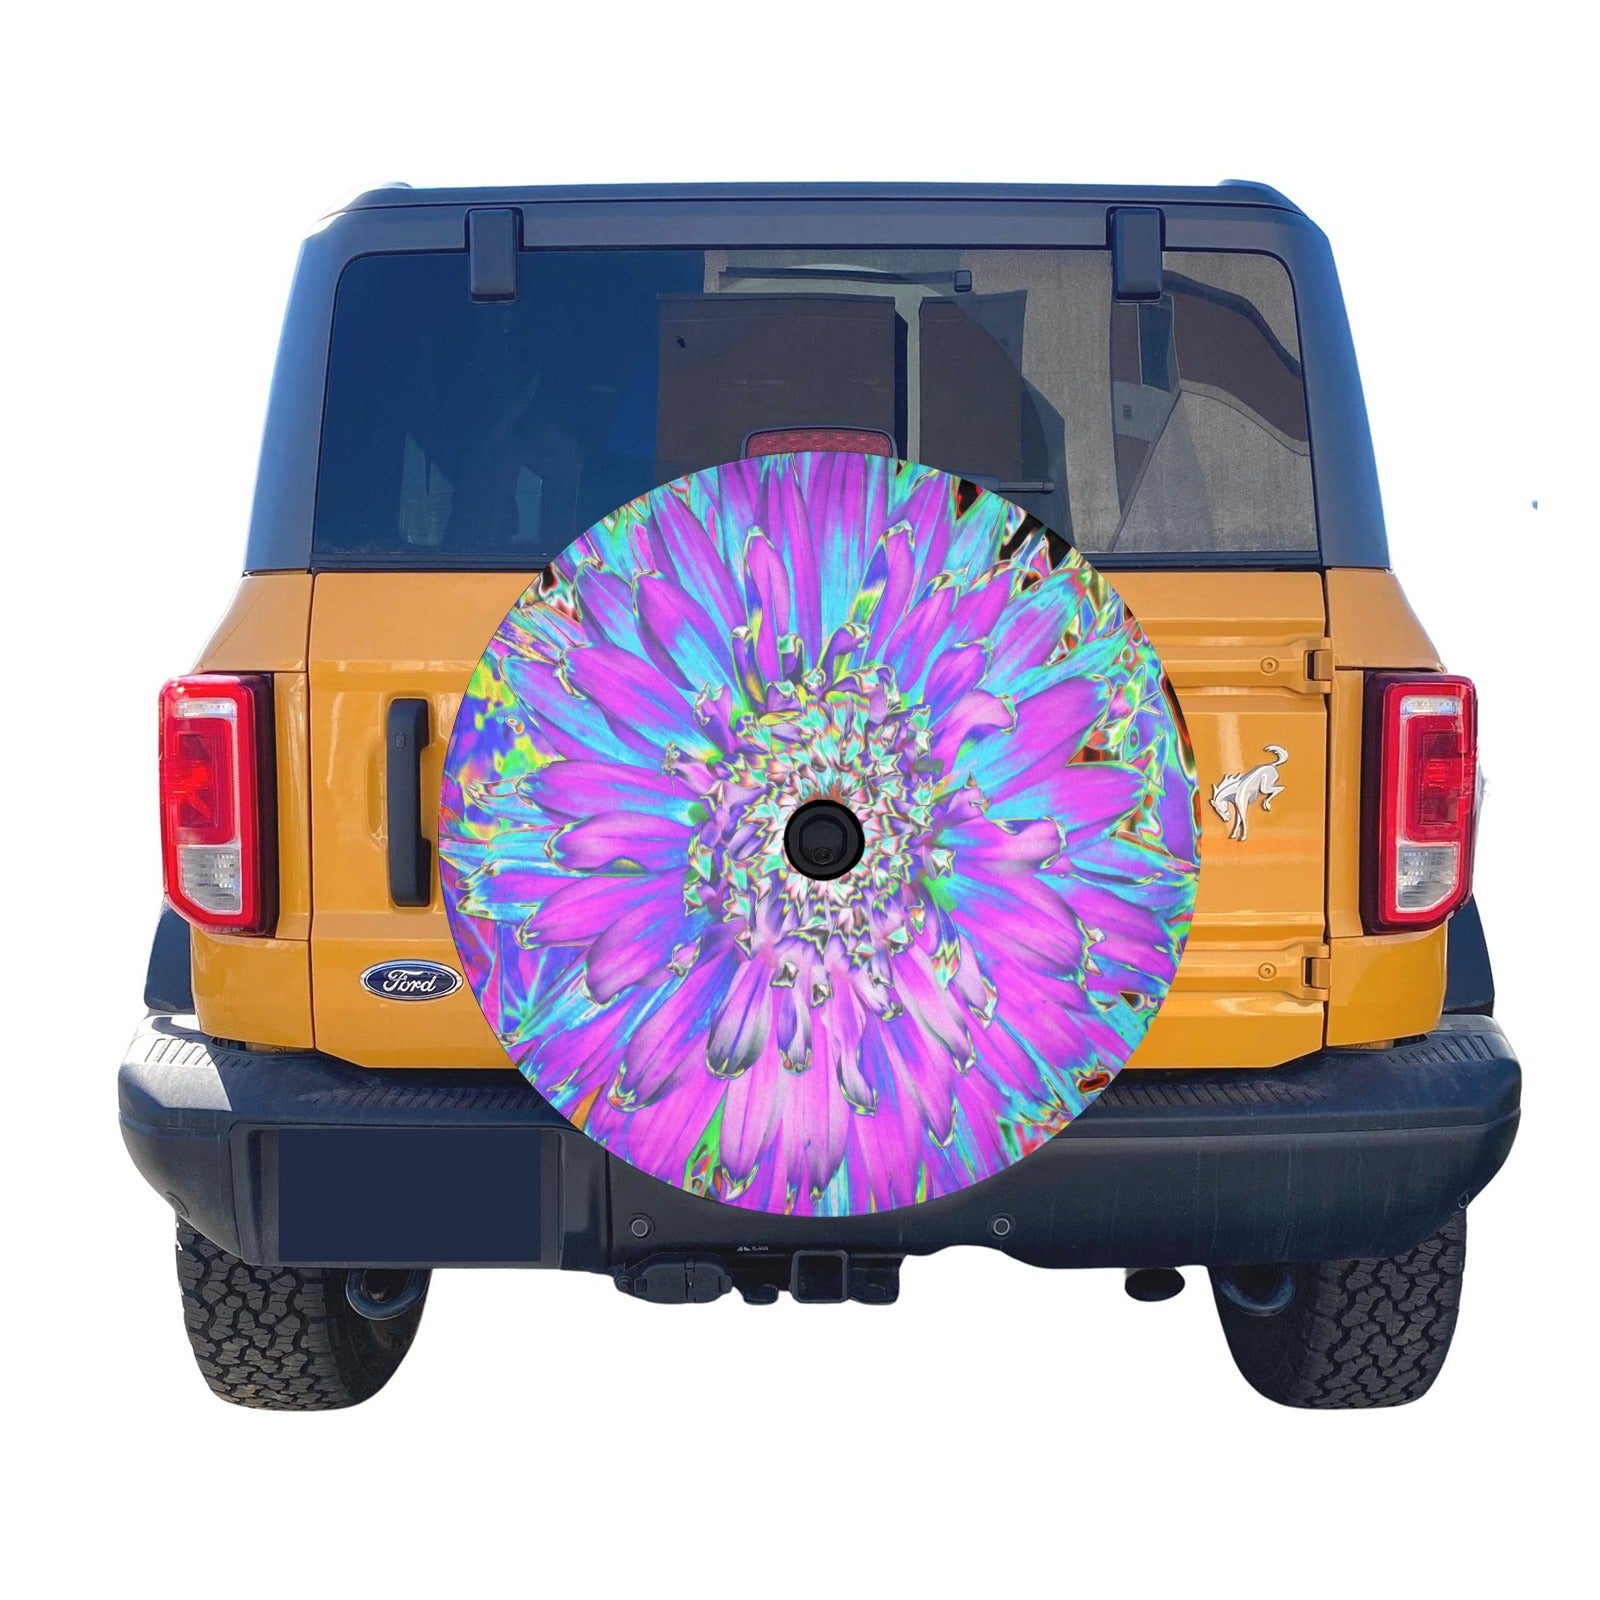 Spare Tire Cover with Backup Camera Hole - Trippy Abstract Aqua, Lime Green and Purple Dahlia - Small